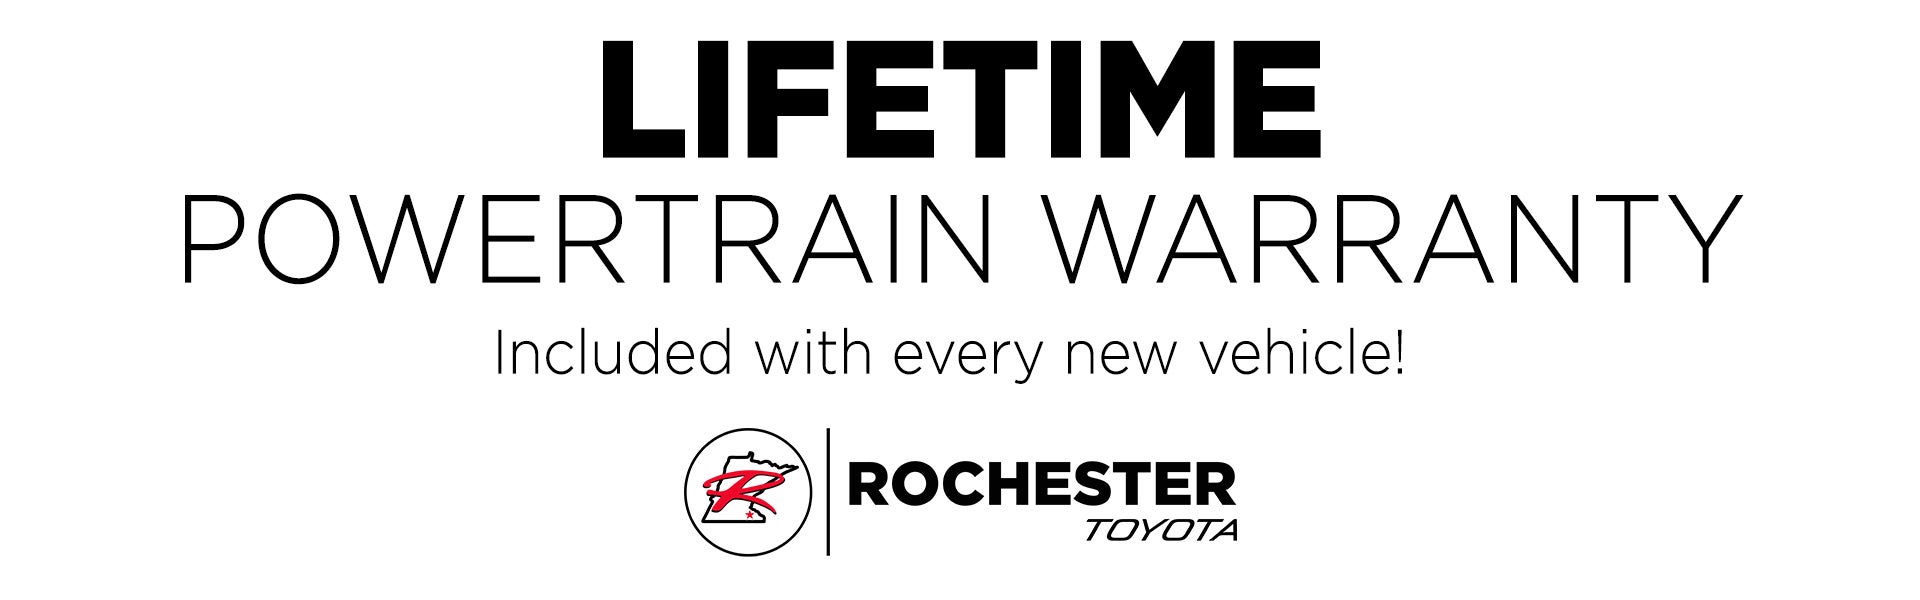 Lifetime Powertrain Warranty included with every new vehicle at Rochester Toyota